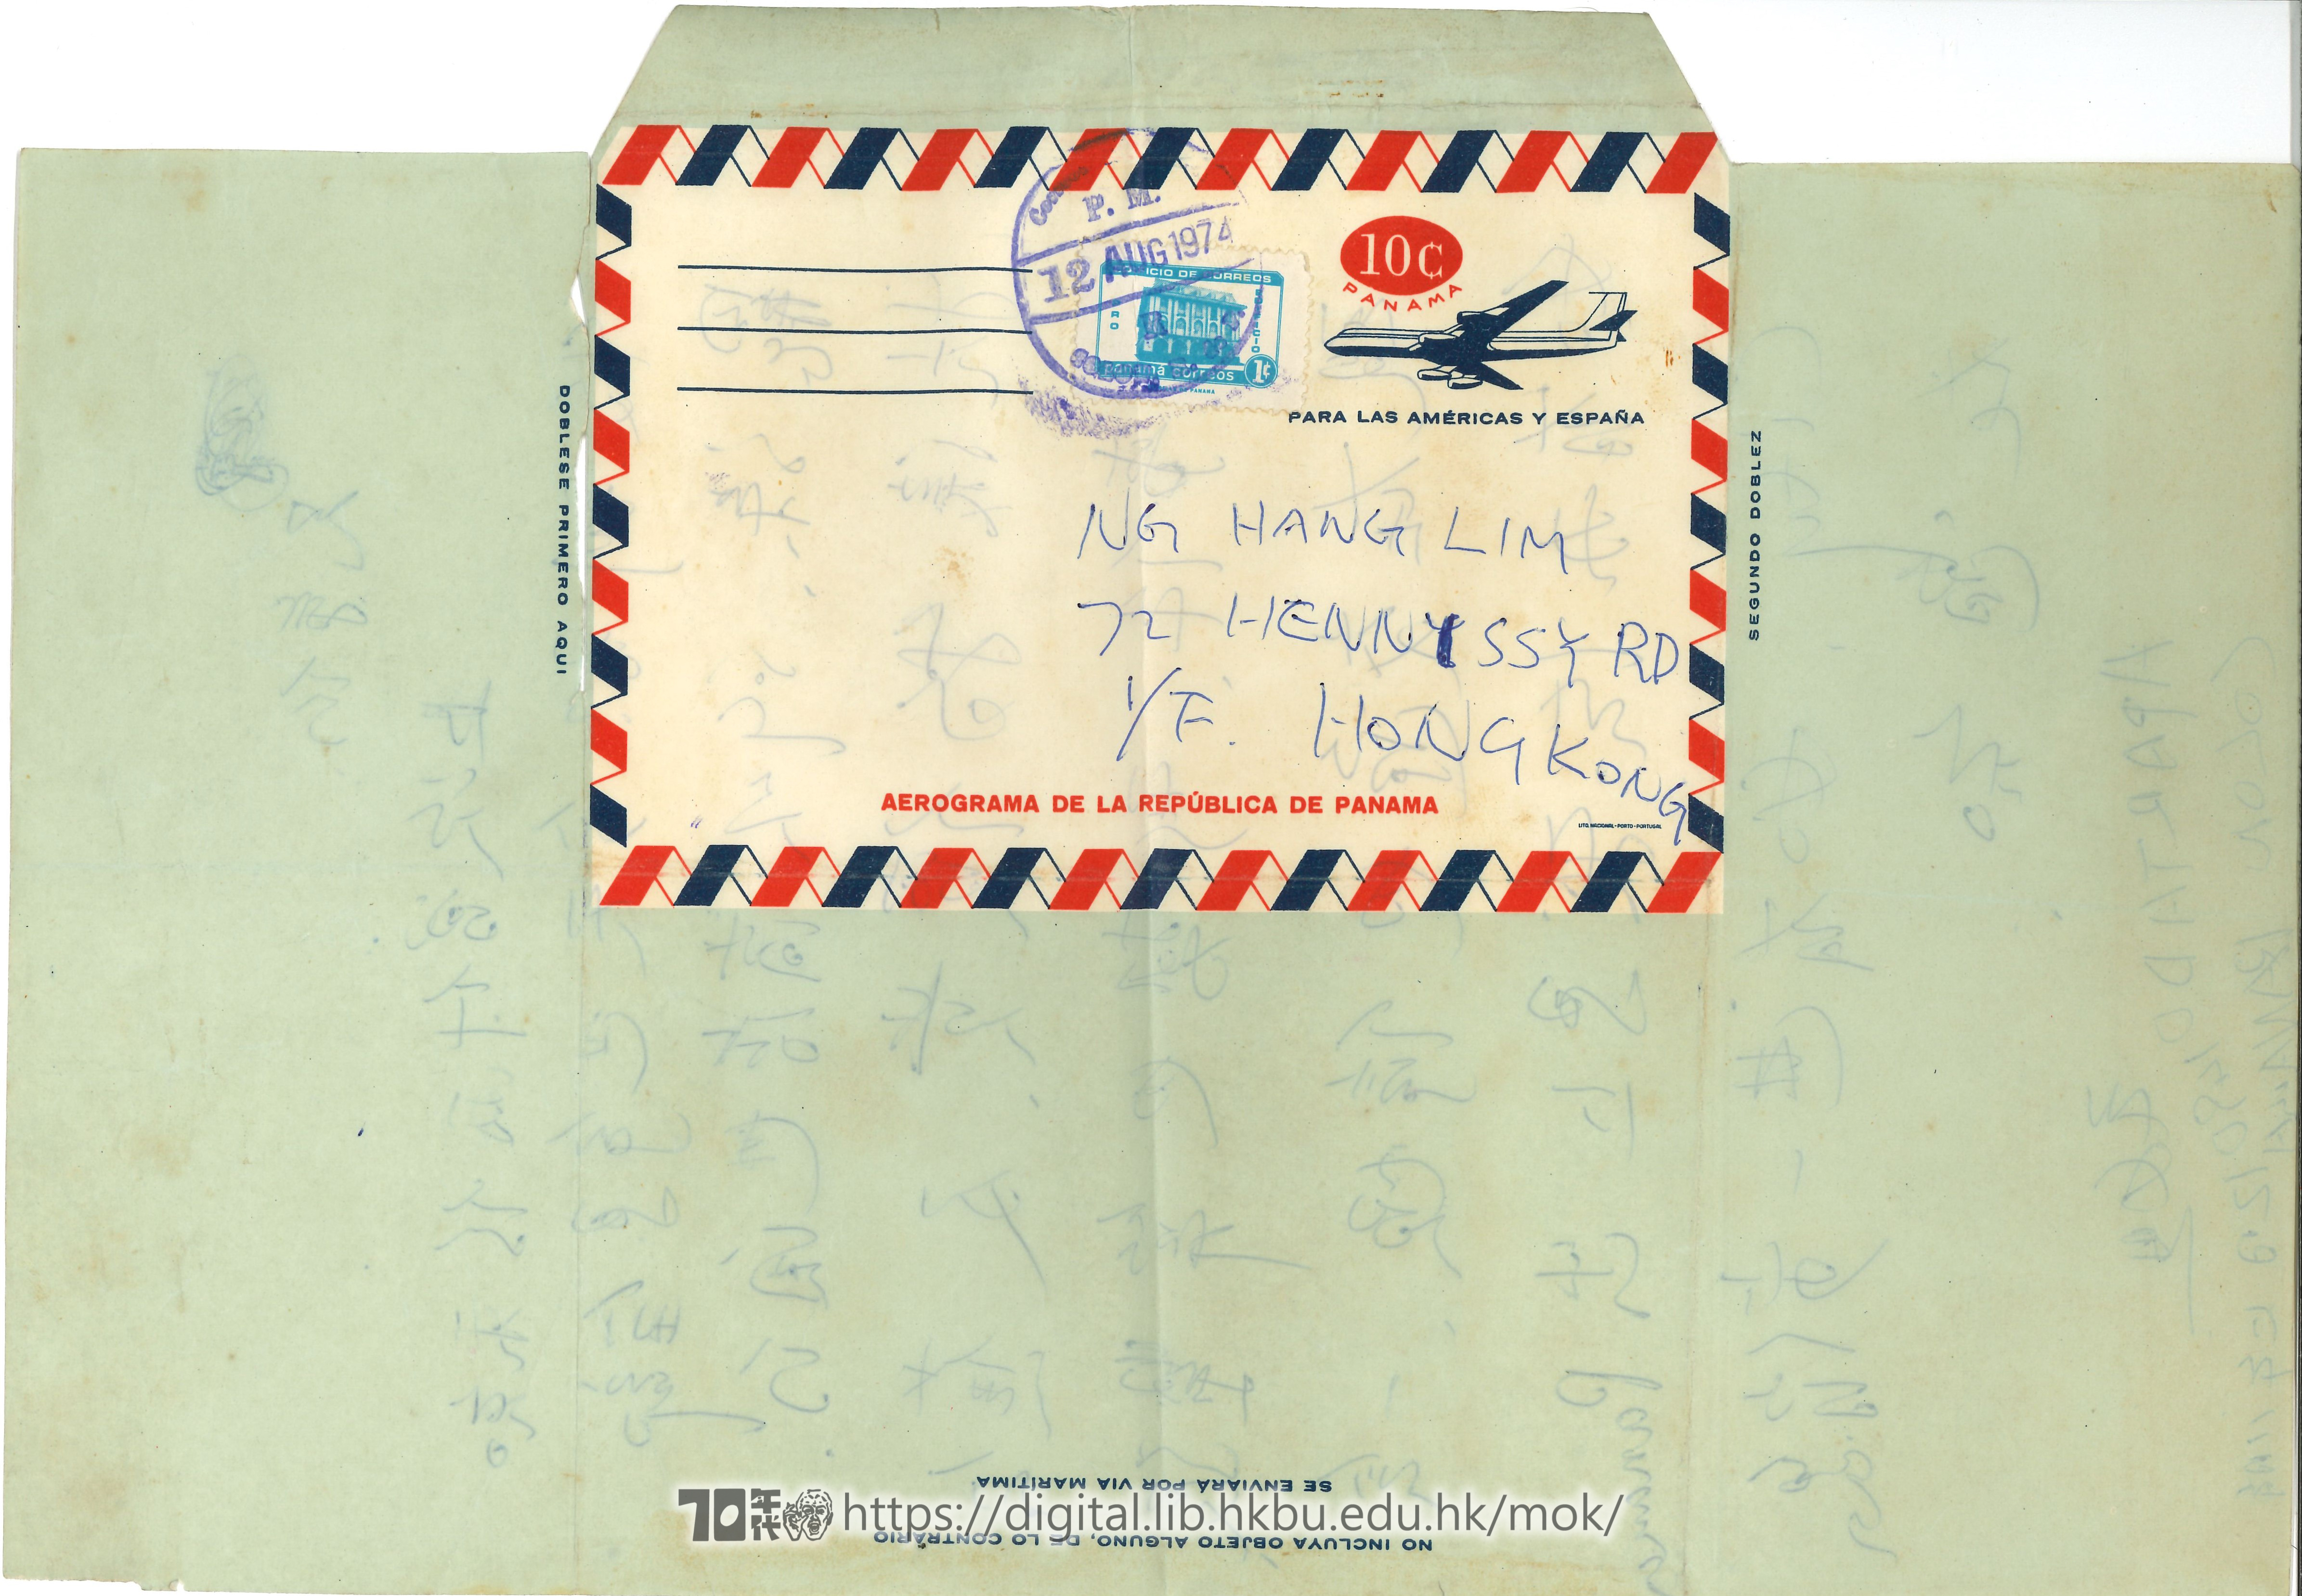   Letter from Ping Je to Ng Han Lim  